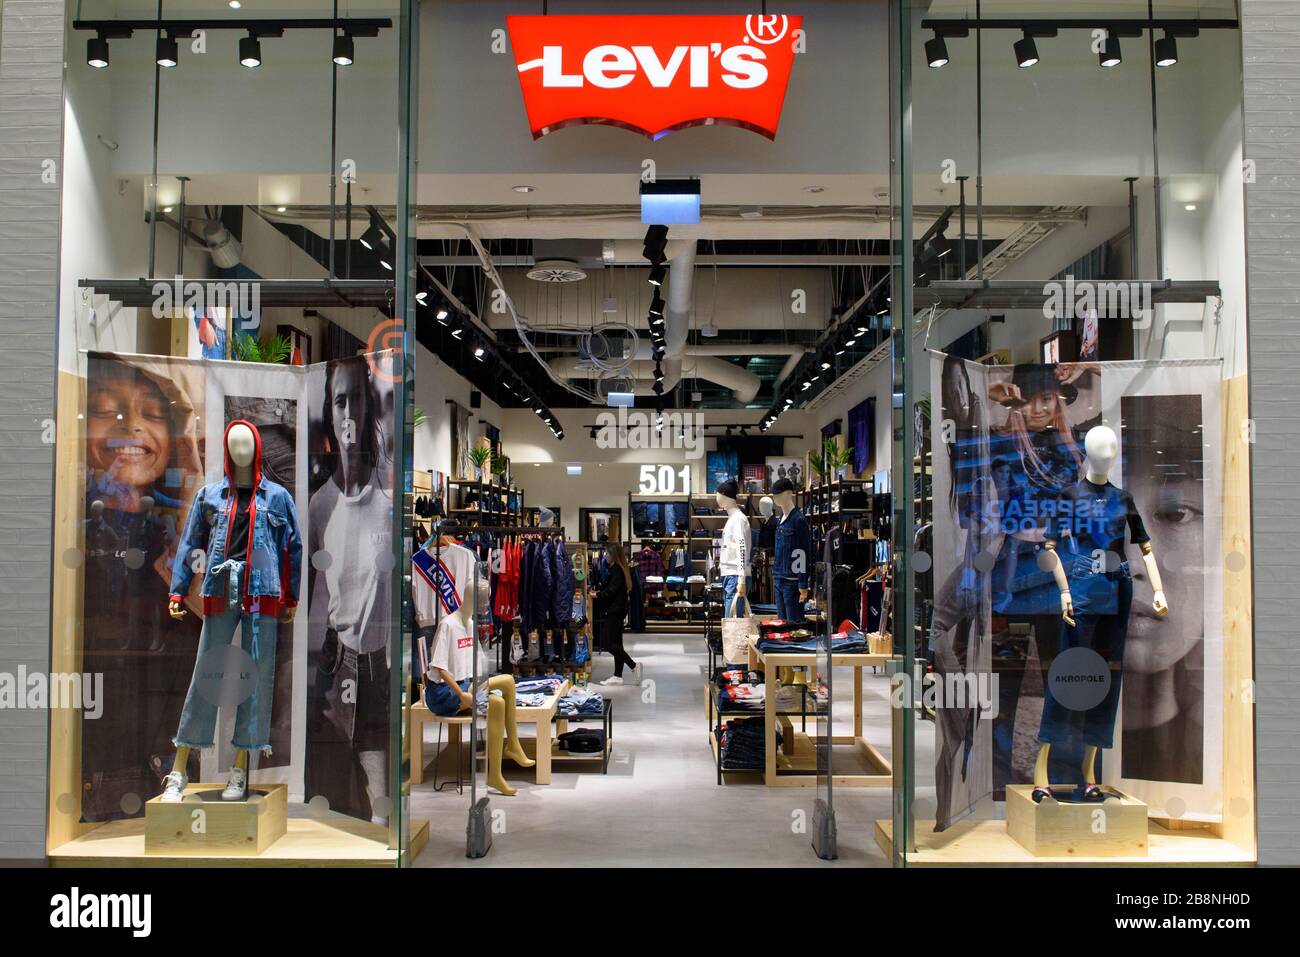 RIGA, LATVIA. 4th April 2019. Levi's brand logo on shop. Levi Strauss & Co is an American clothing company known worldwide for its Levi's brand of den Stock Photo